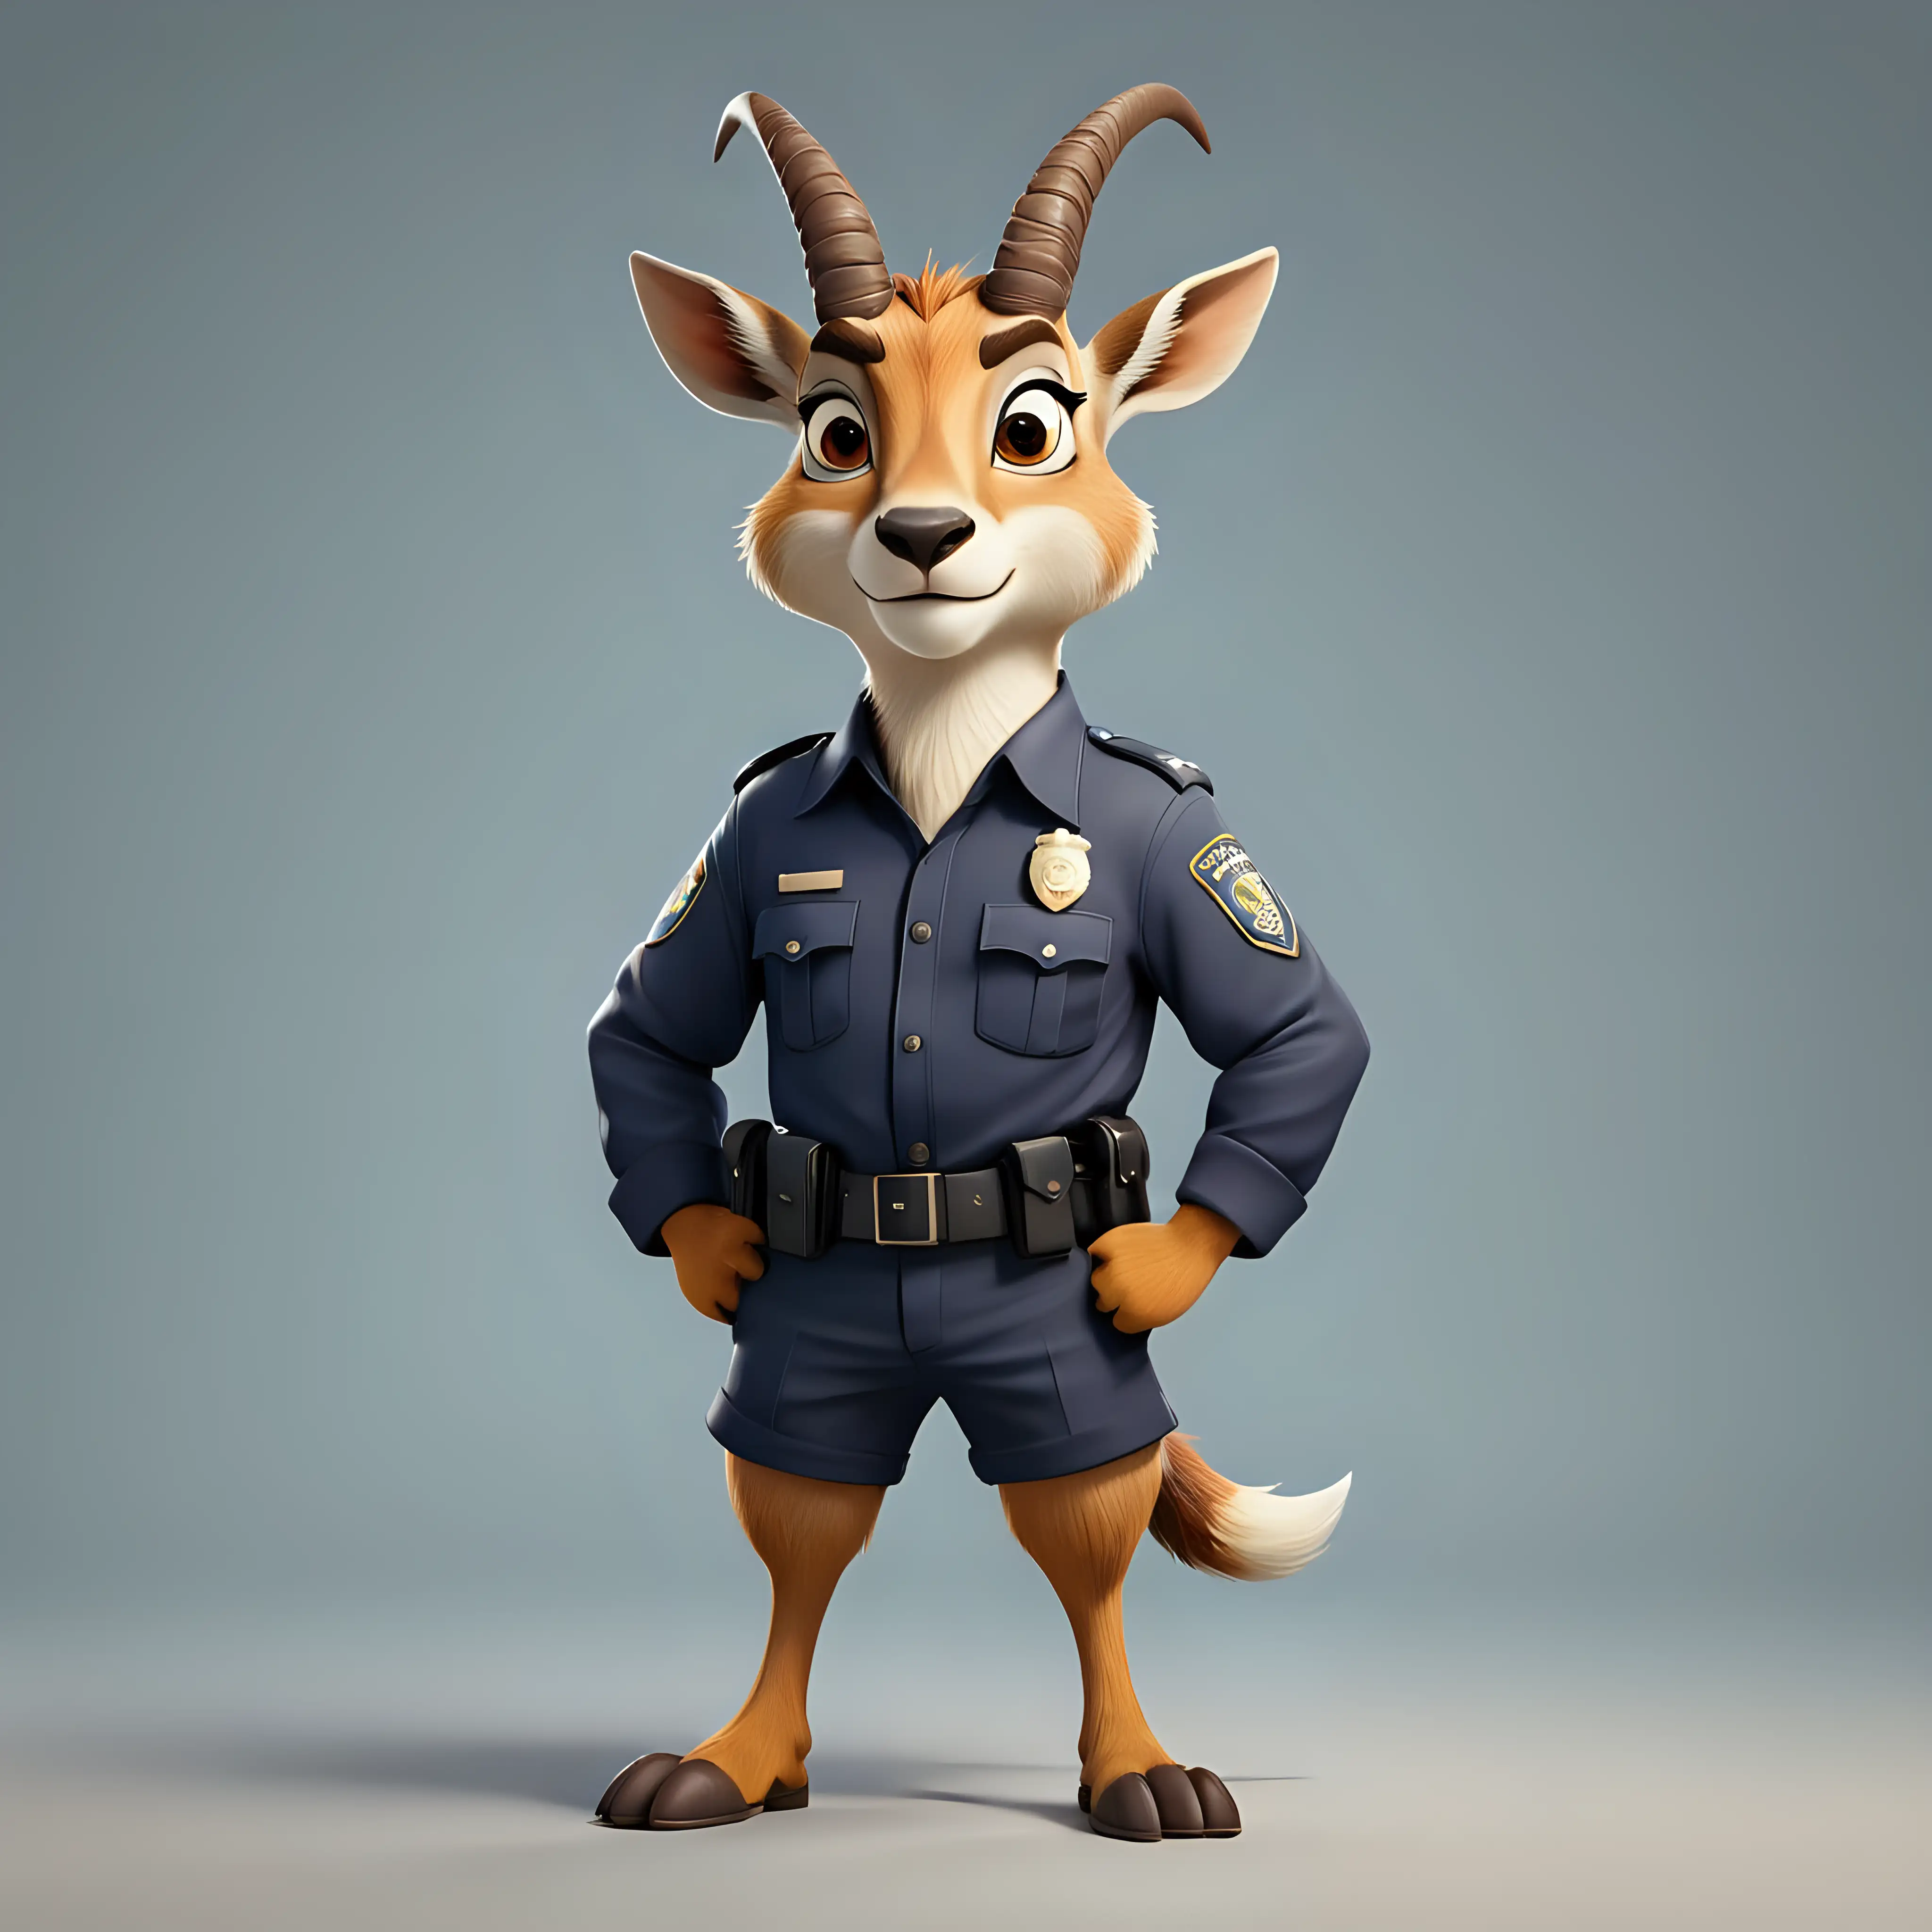 Cartoon Antelope Police Officer Playful Illustration of an Antelope in Police Attire